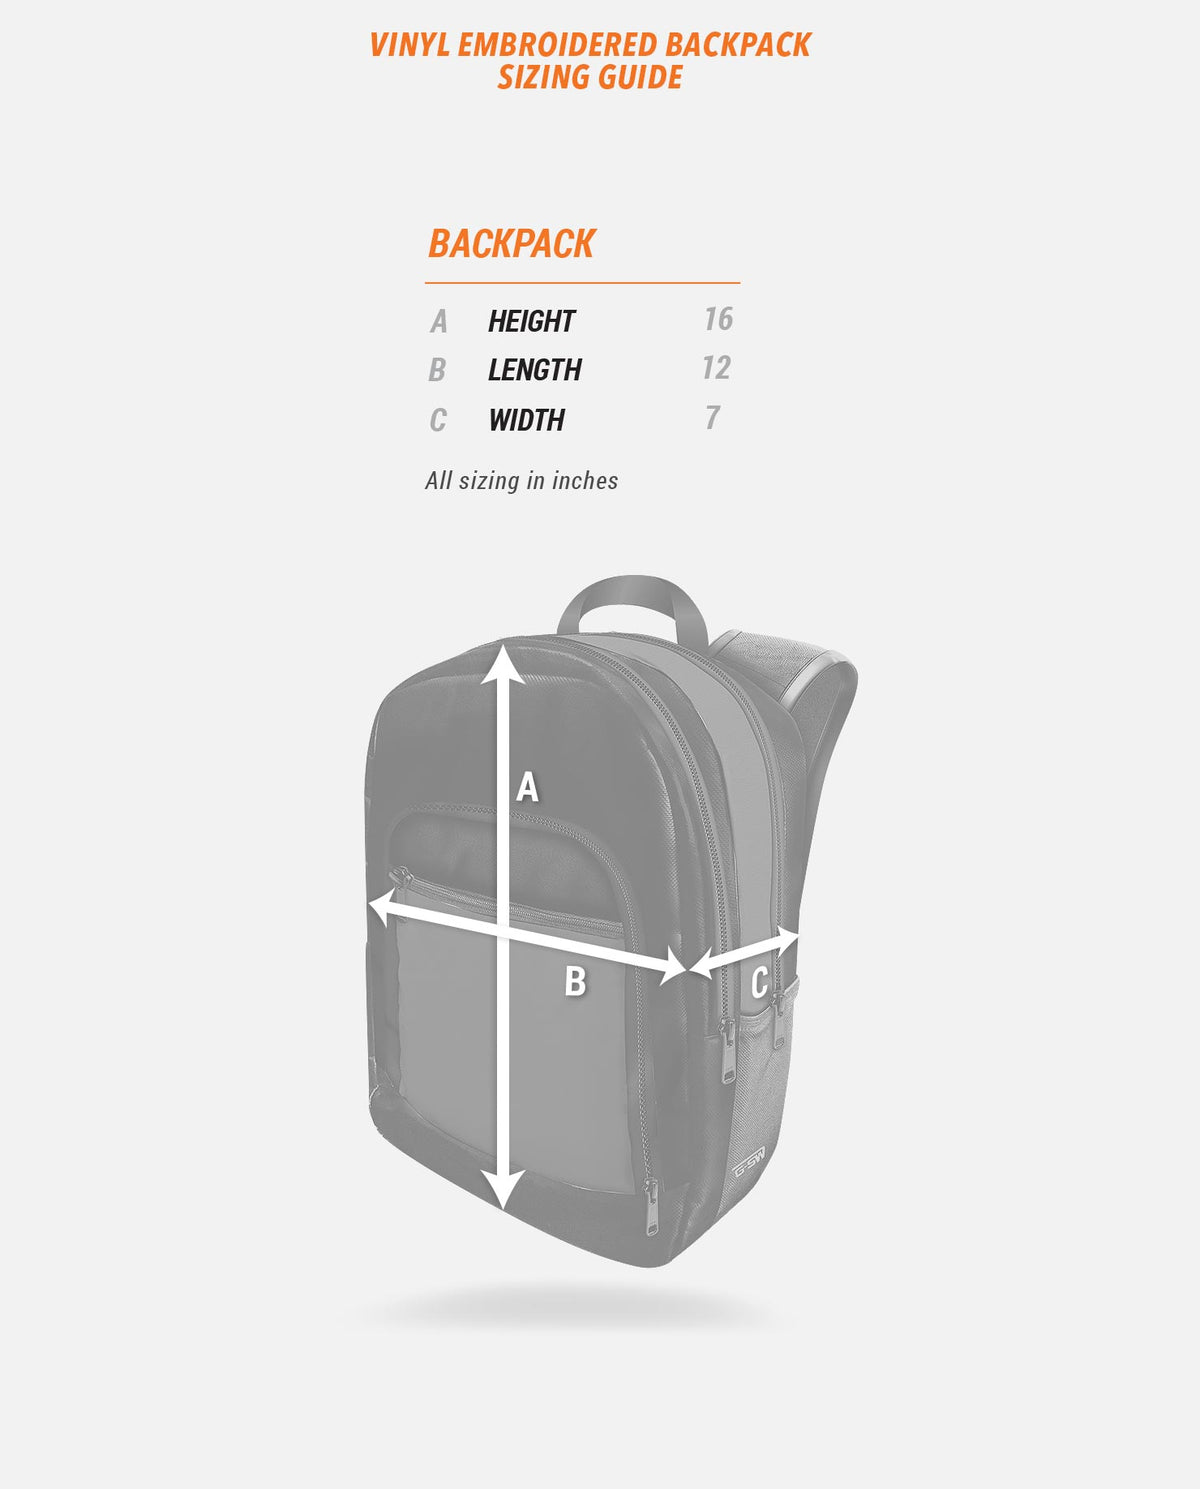 Vinyl Embroidered Backpack sizing guide